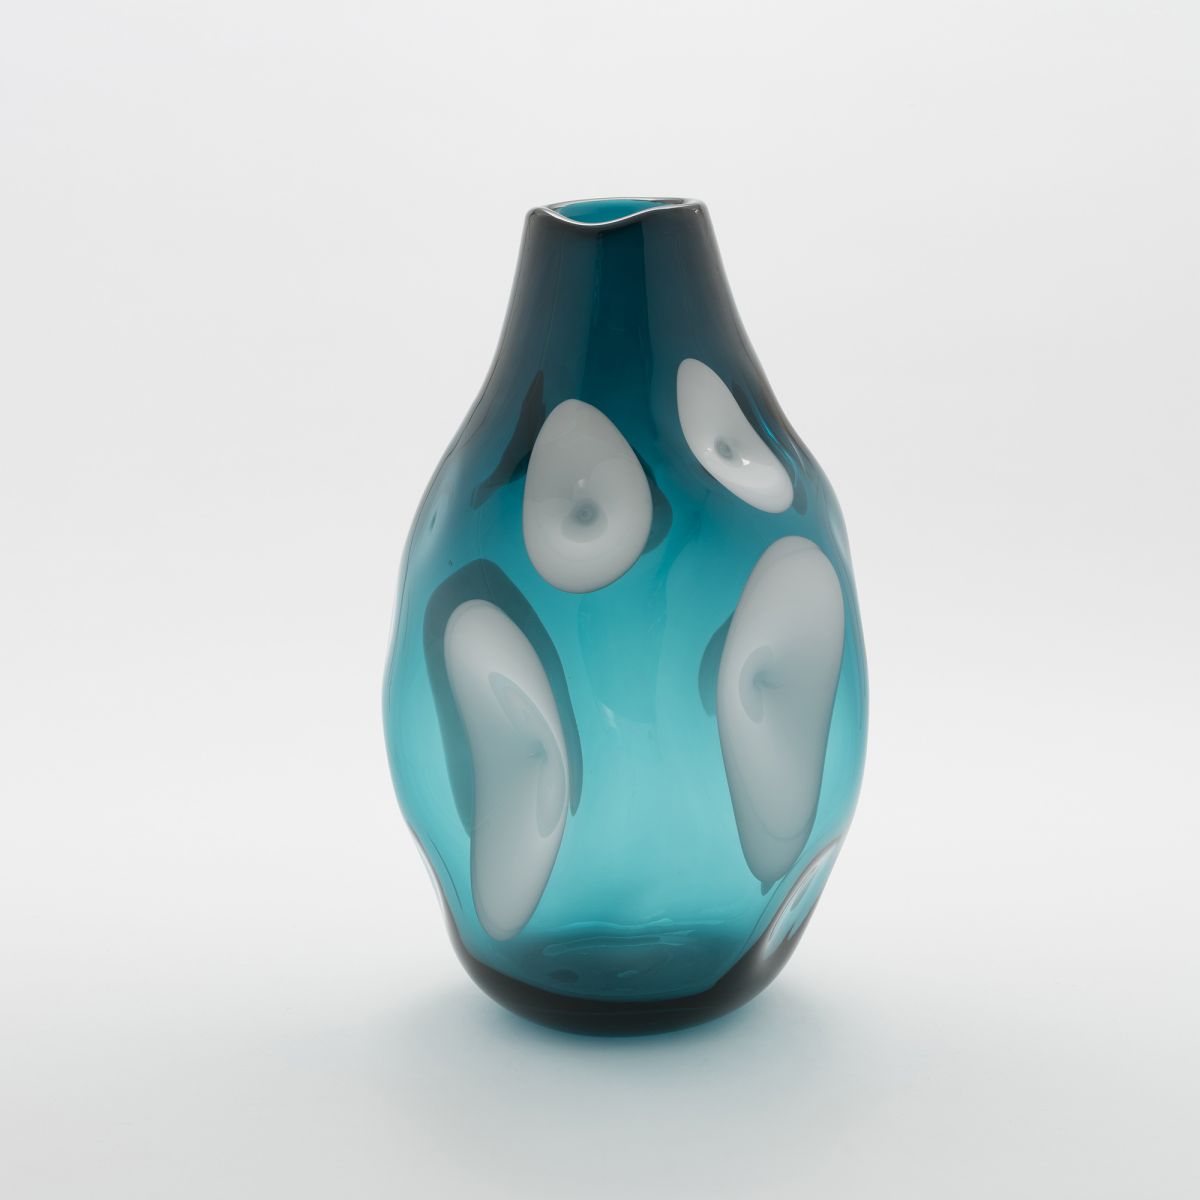 Vase Reperto ‐ indaco with white dots Domitilla Harding pic-1